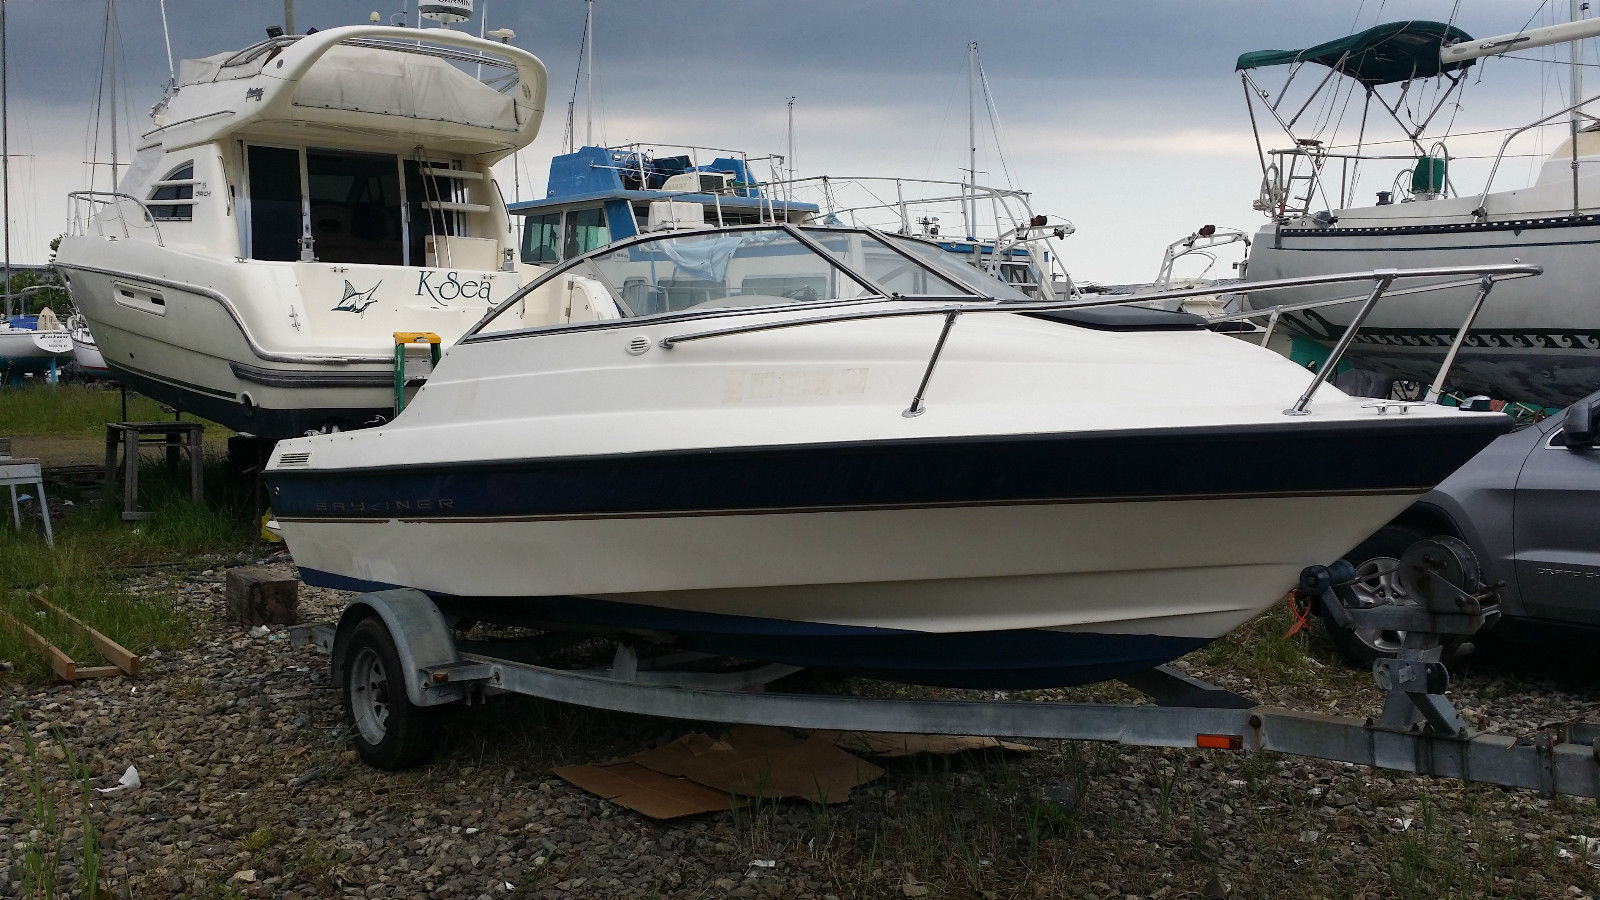 Bayliner 1952 boat for sale from USA